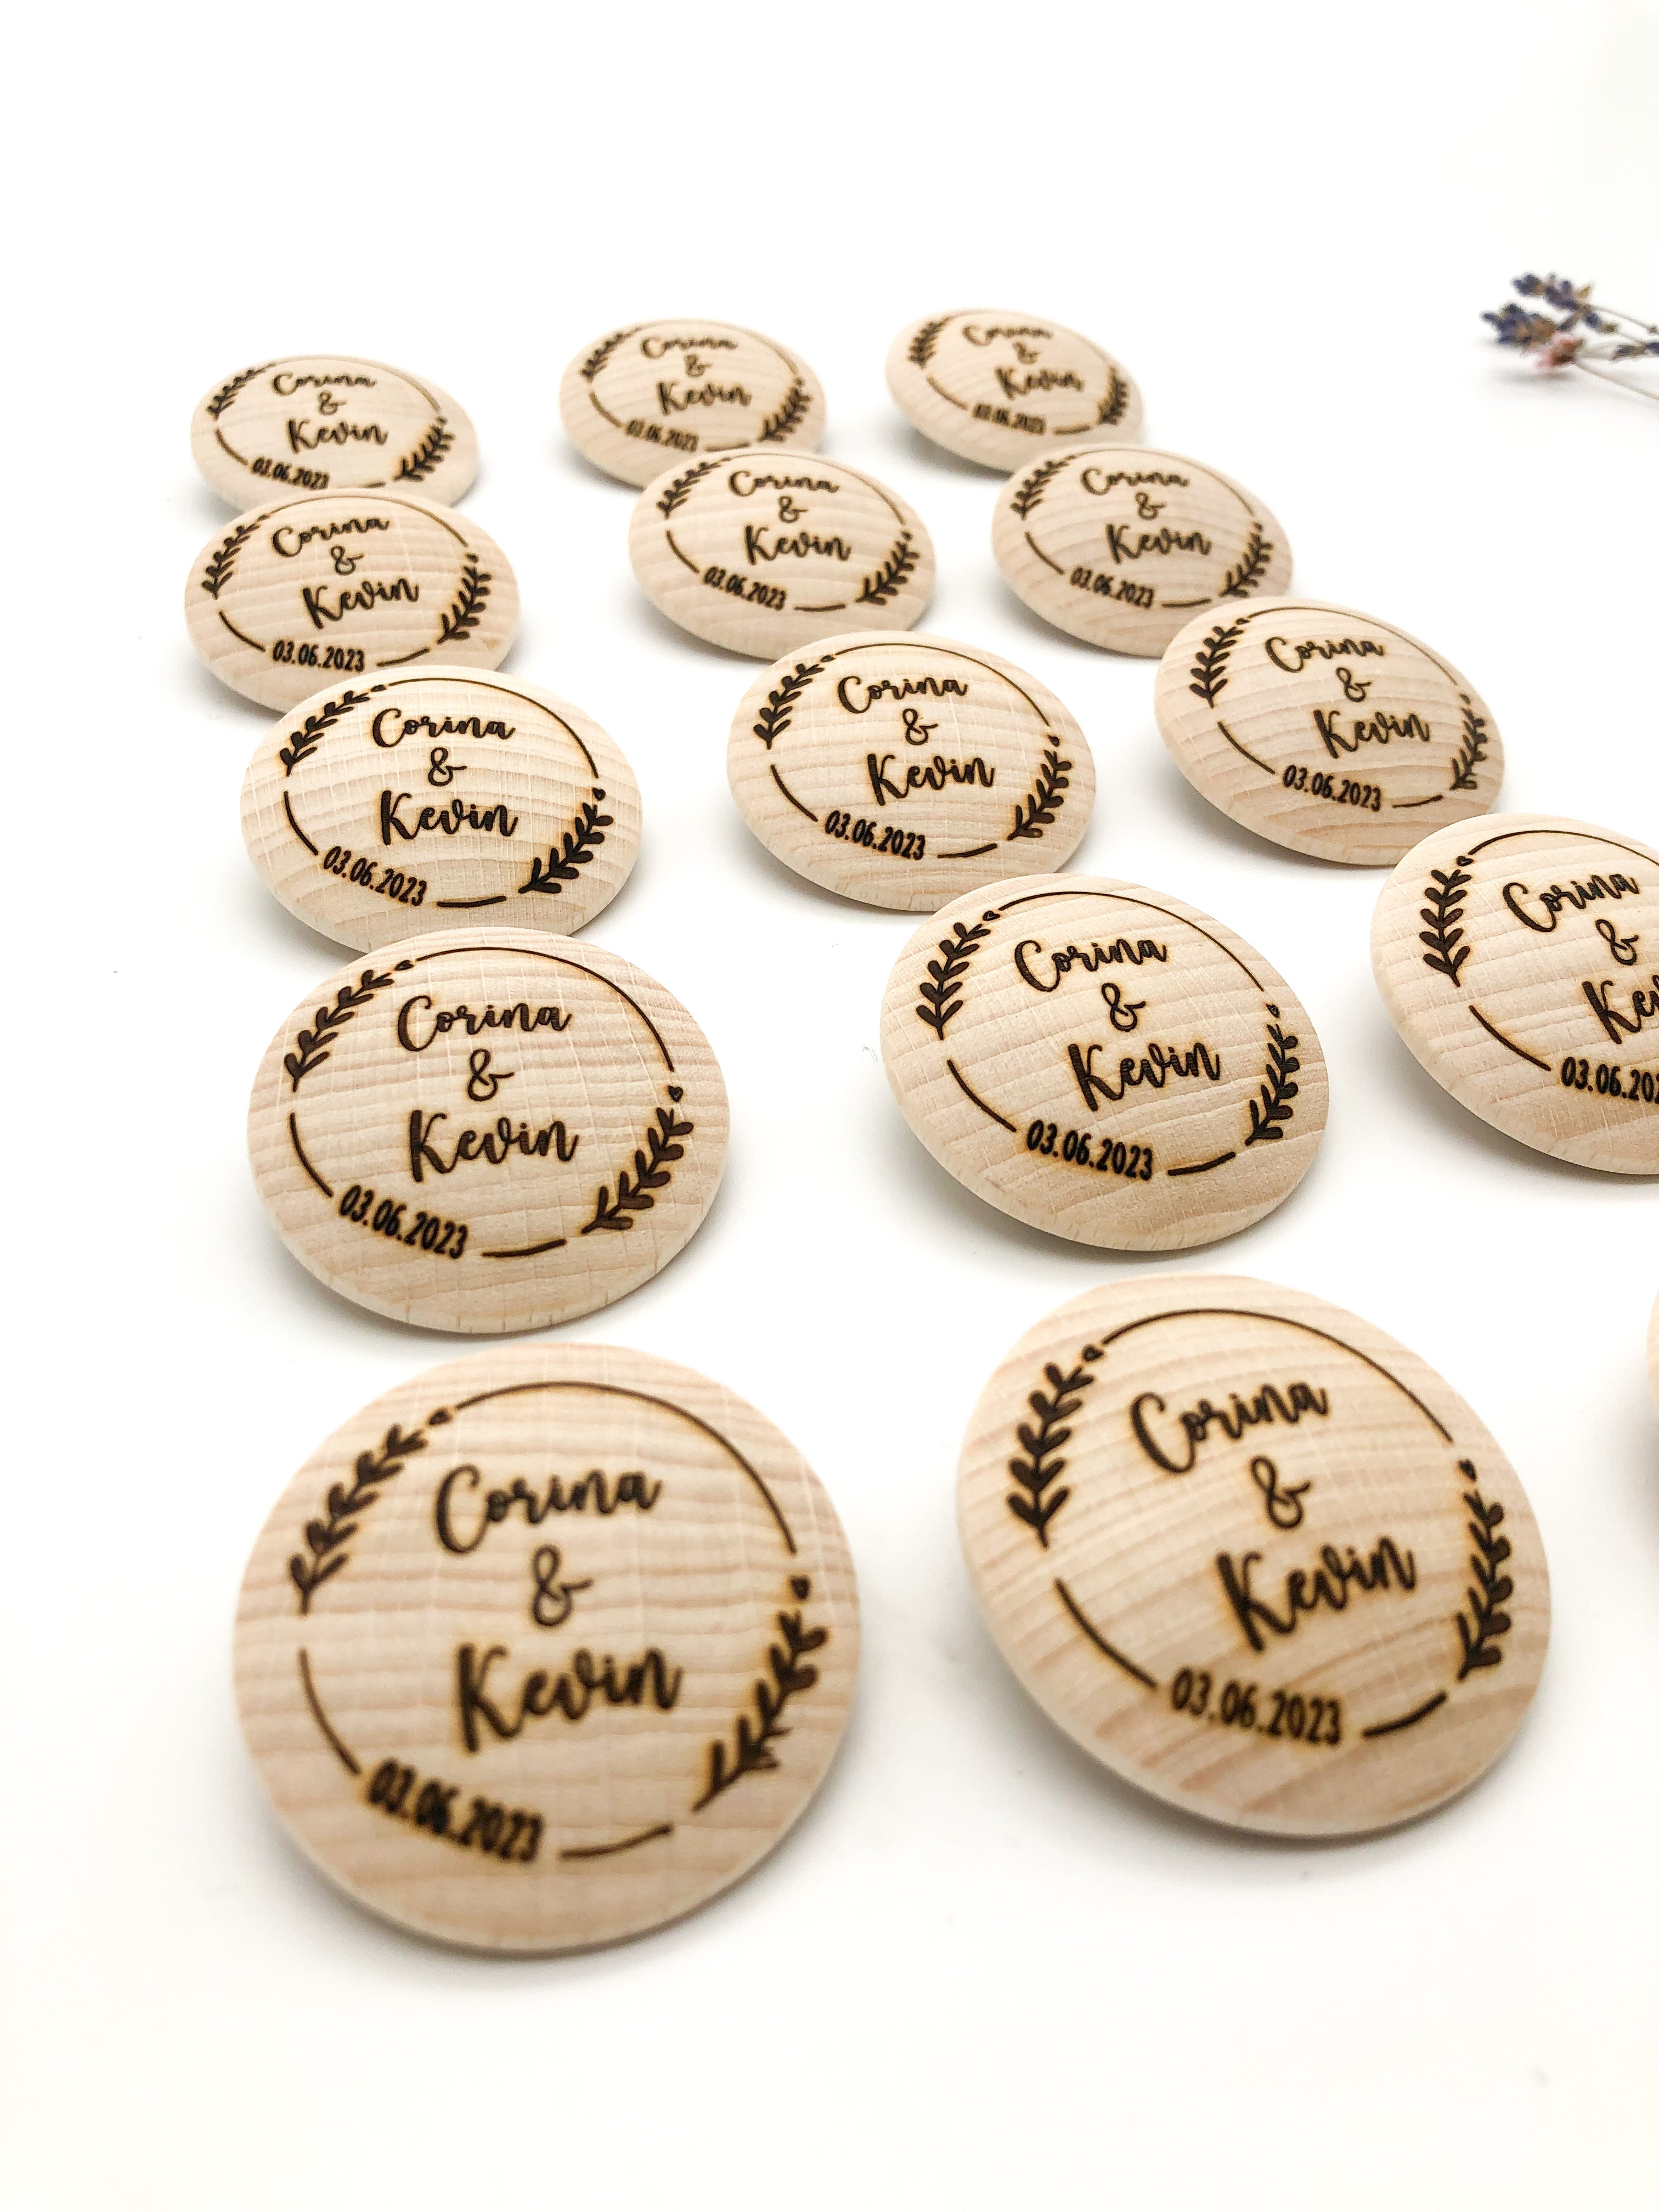 Wooden wedding pin with personalized engraving